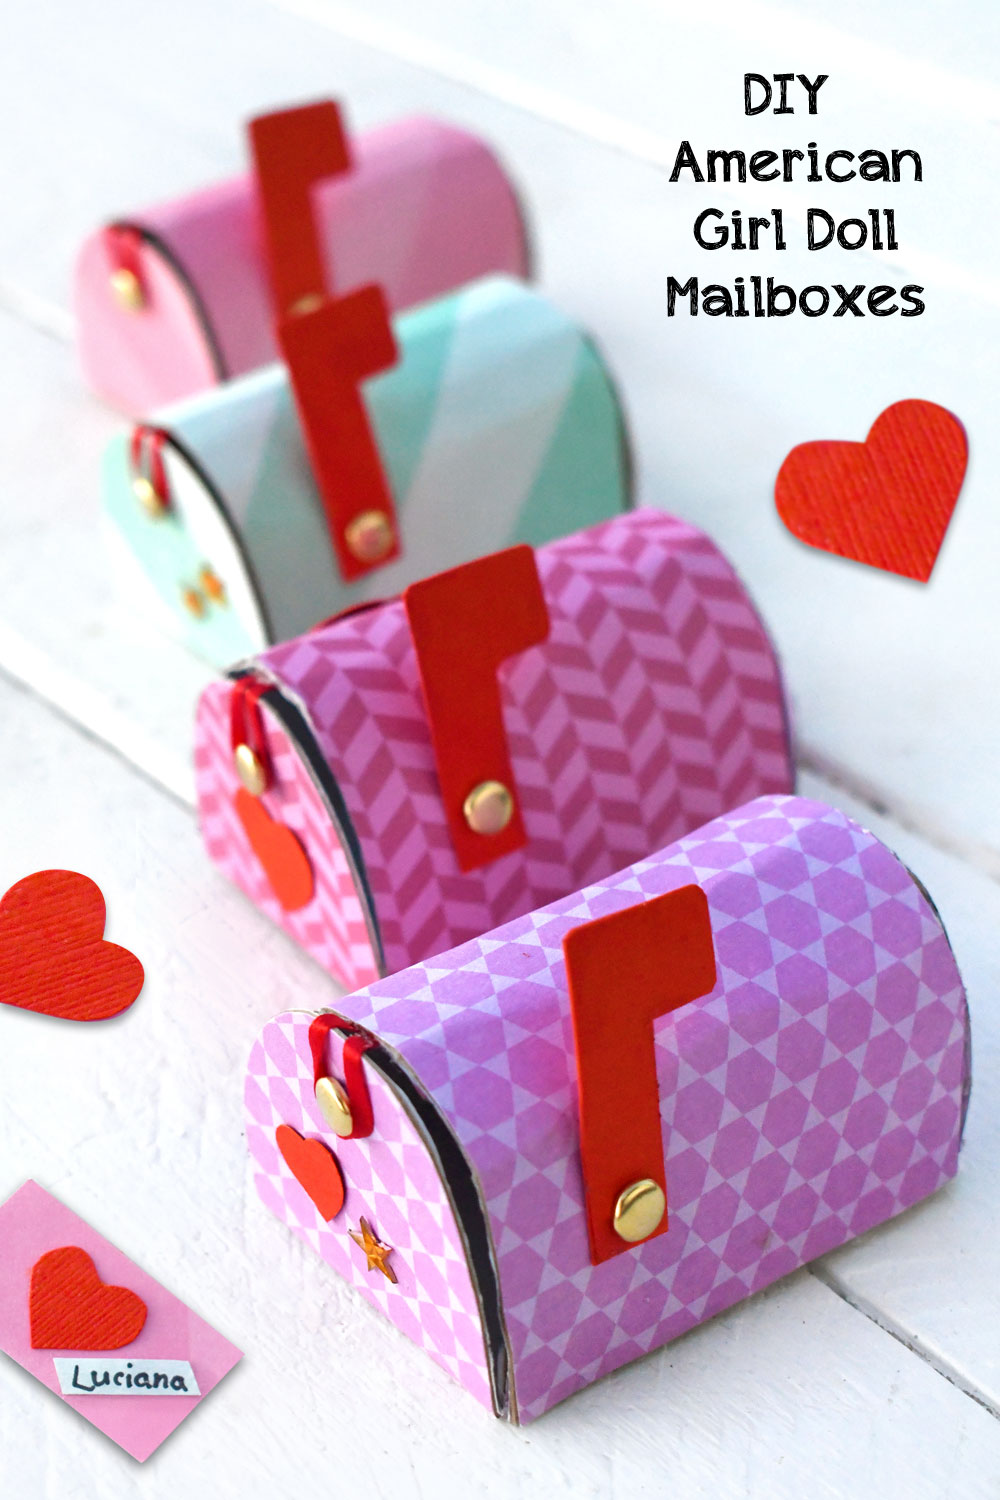 American Girl doll mailboxes kids craft